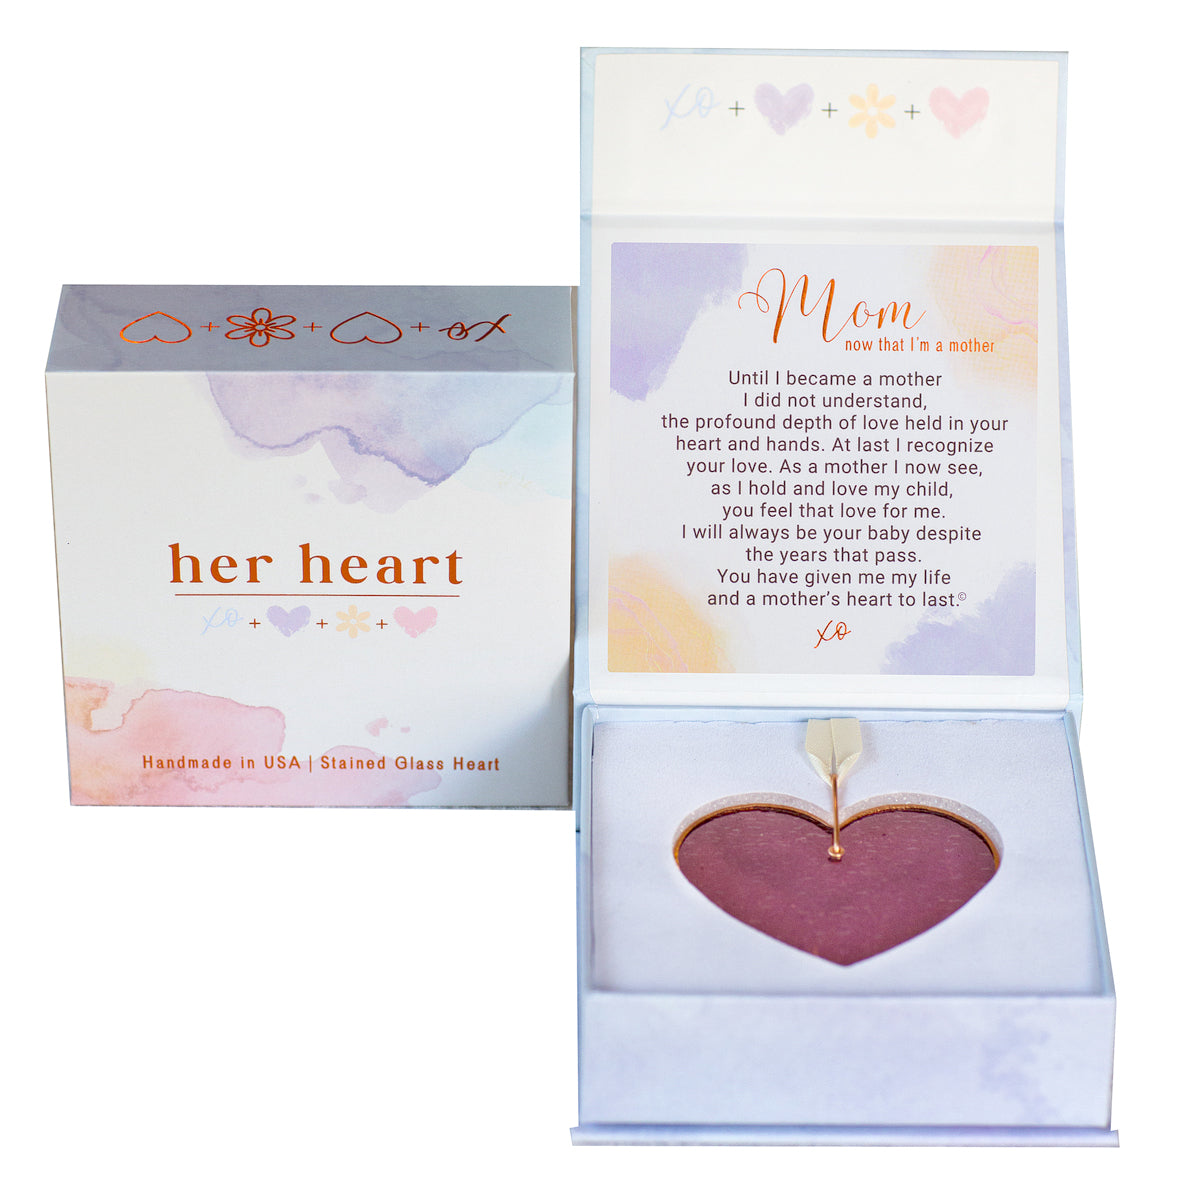 Her Heart for Mom, now that I&#39;m a mother gift box shown closed and open.  Open box features sentiment card and heart resting in foam cushion.